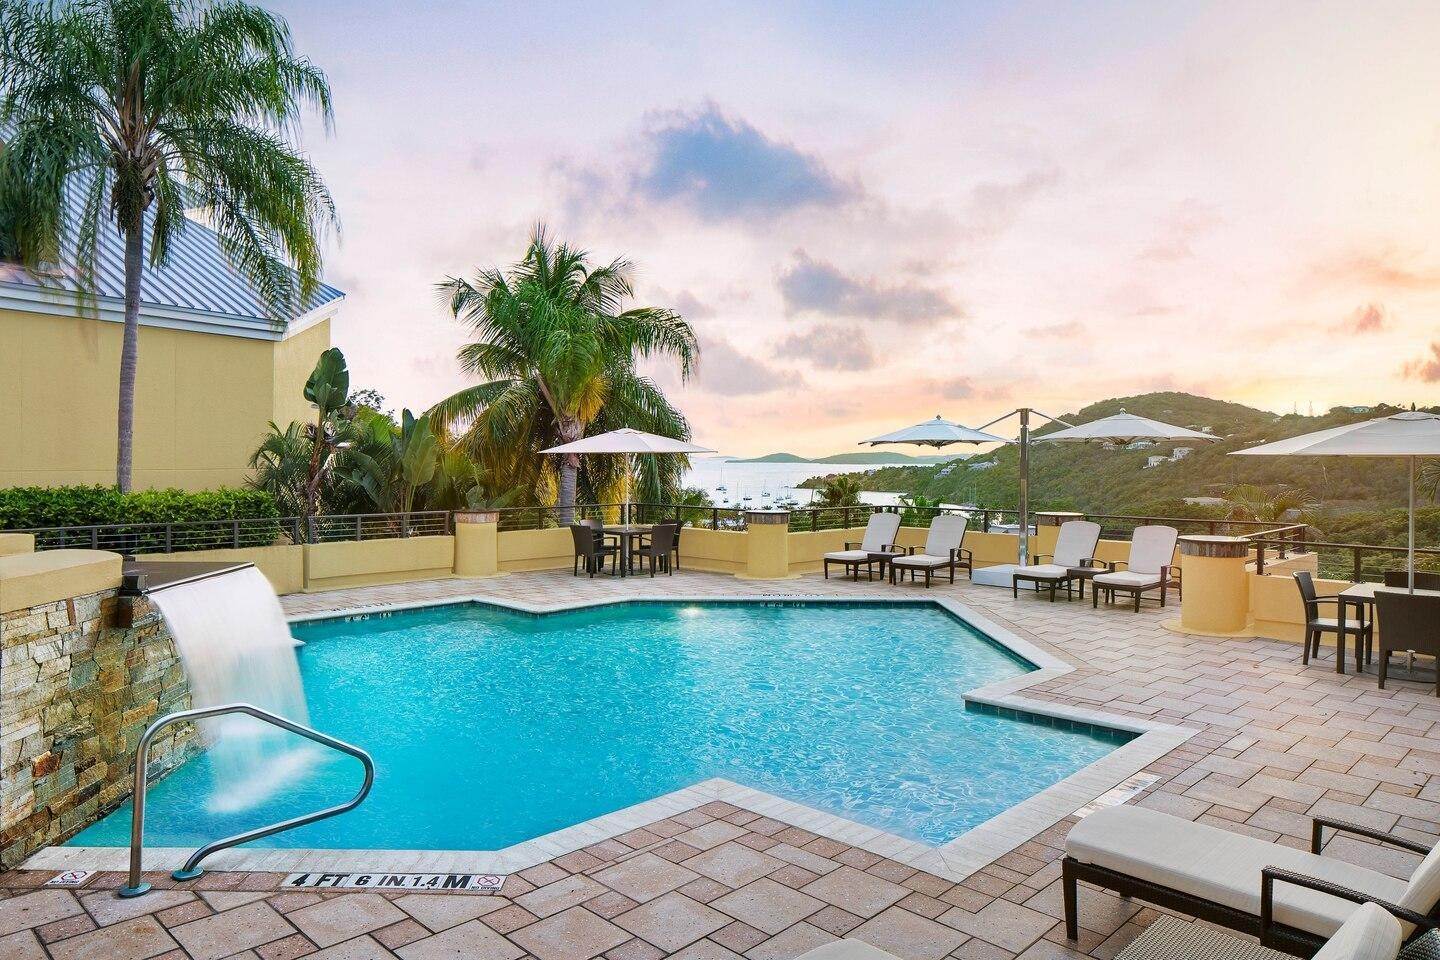 1. fractional ownership prop for Sale at Chocolate Hole St John, Virgin Islands 00830 United States Virgin Islands